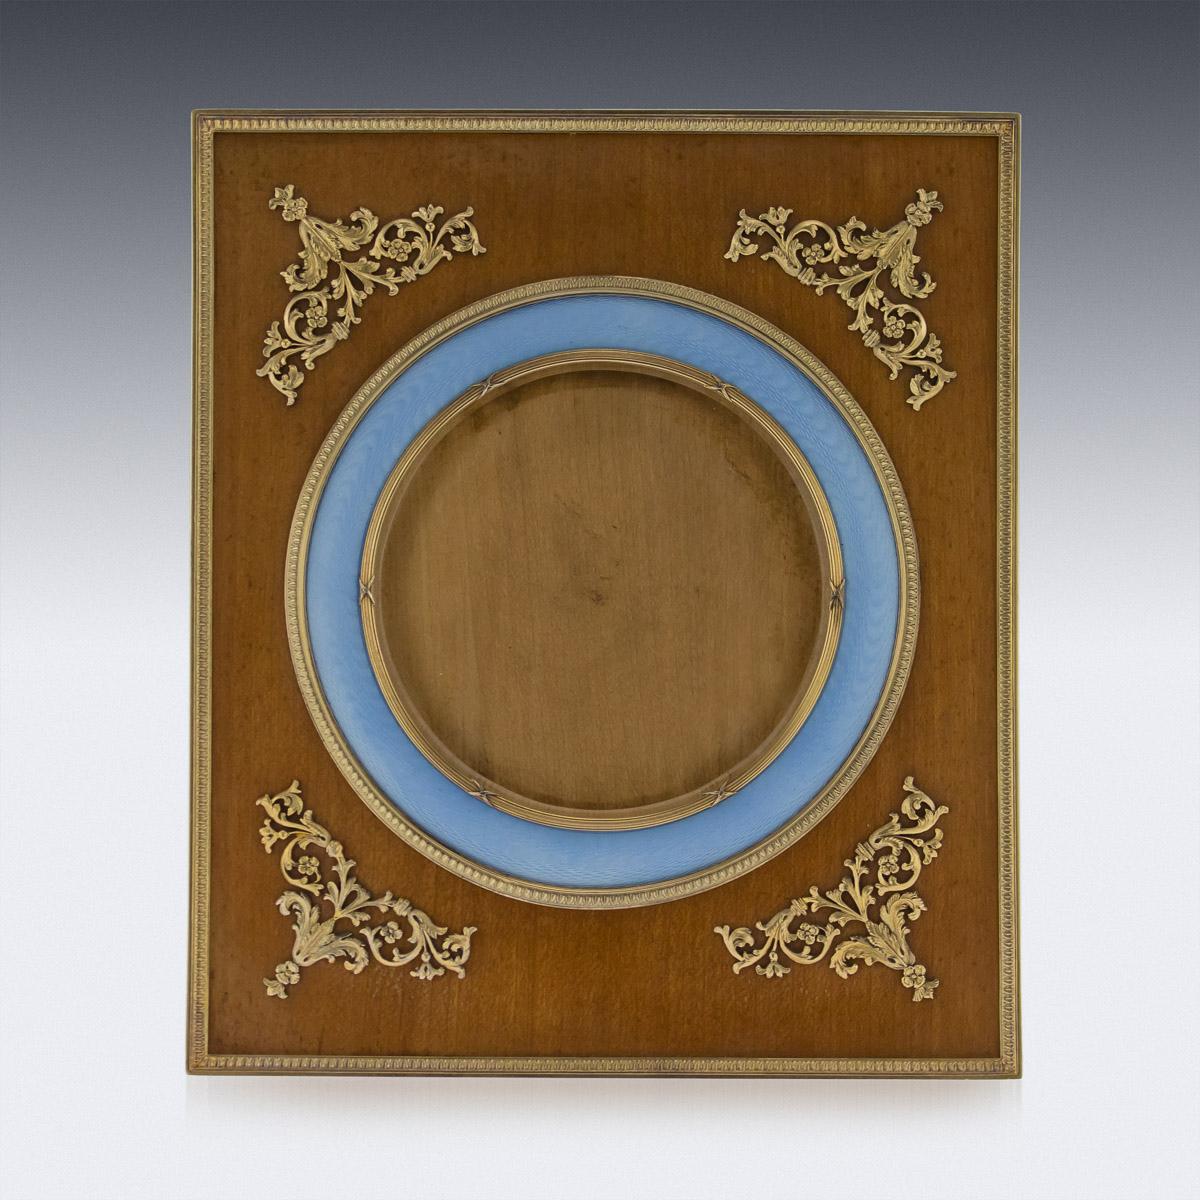 Antique early 20th century exceptional Russian silver gilt, guilloche enamel and wood photograph frame, rectangular shape, the bound reeded bezel border set within translucent light blue-colored enamel over moiré engine-turning, wood surround, back